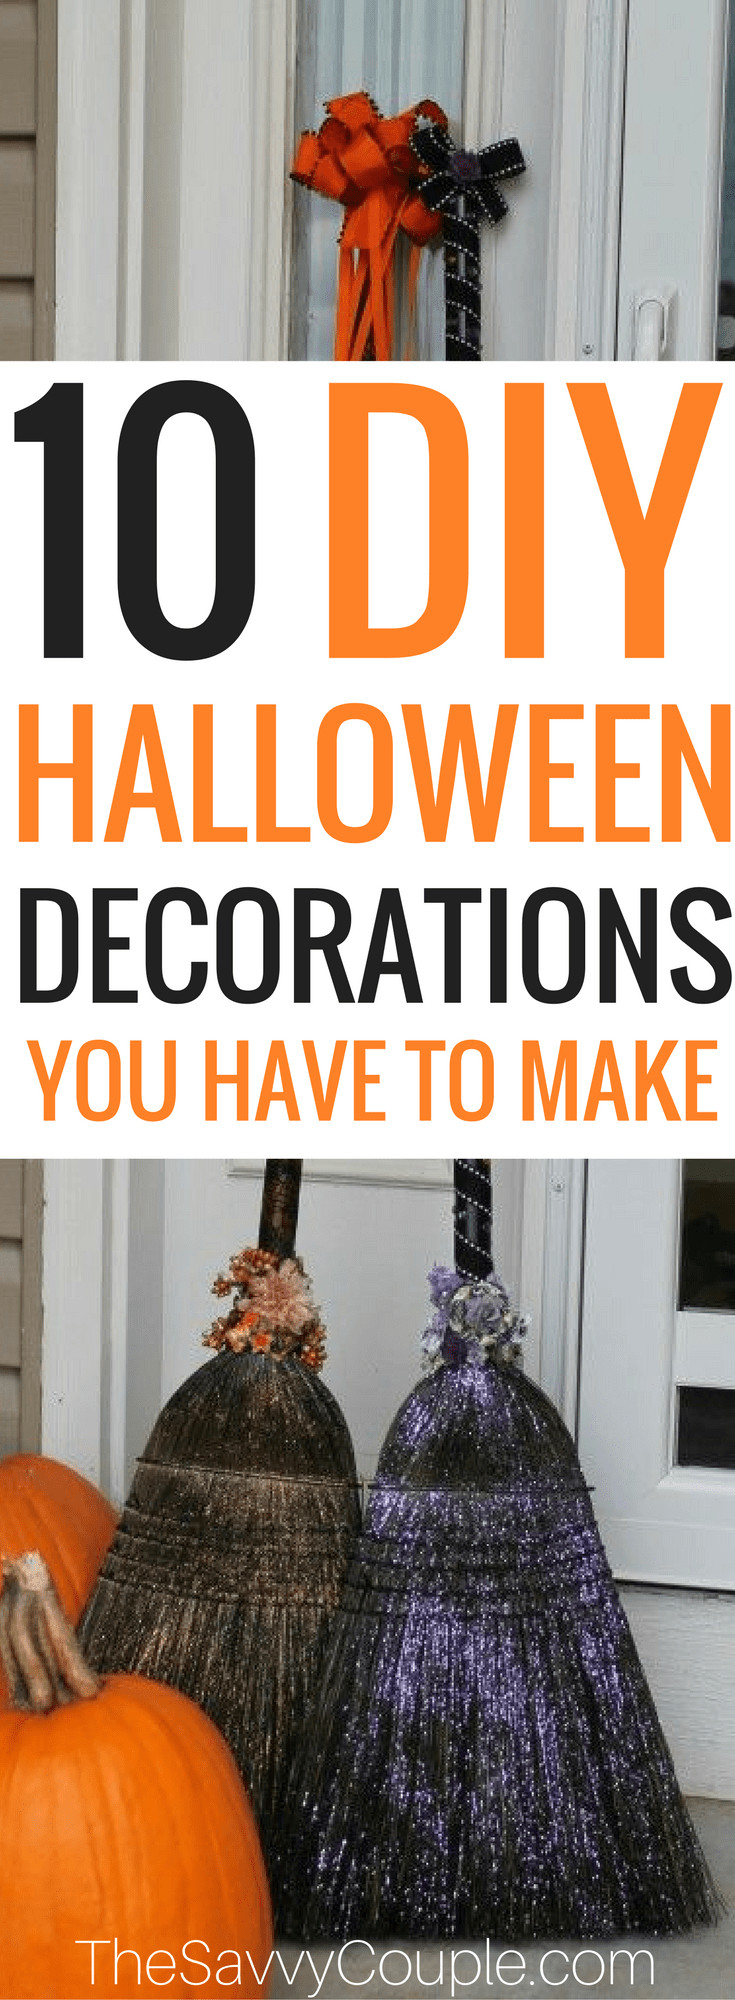 Halloween Party Decoration Ideas Cheap
 10 Cheap Halloween Decorations For The Perfect Spooky Home